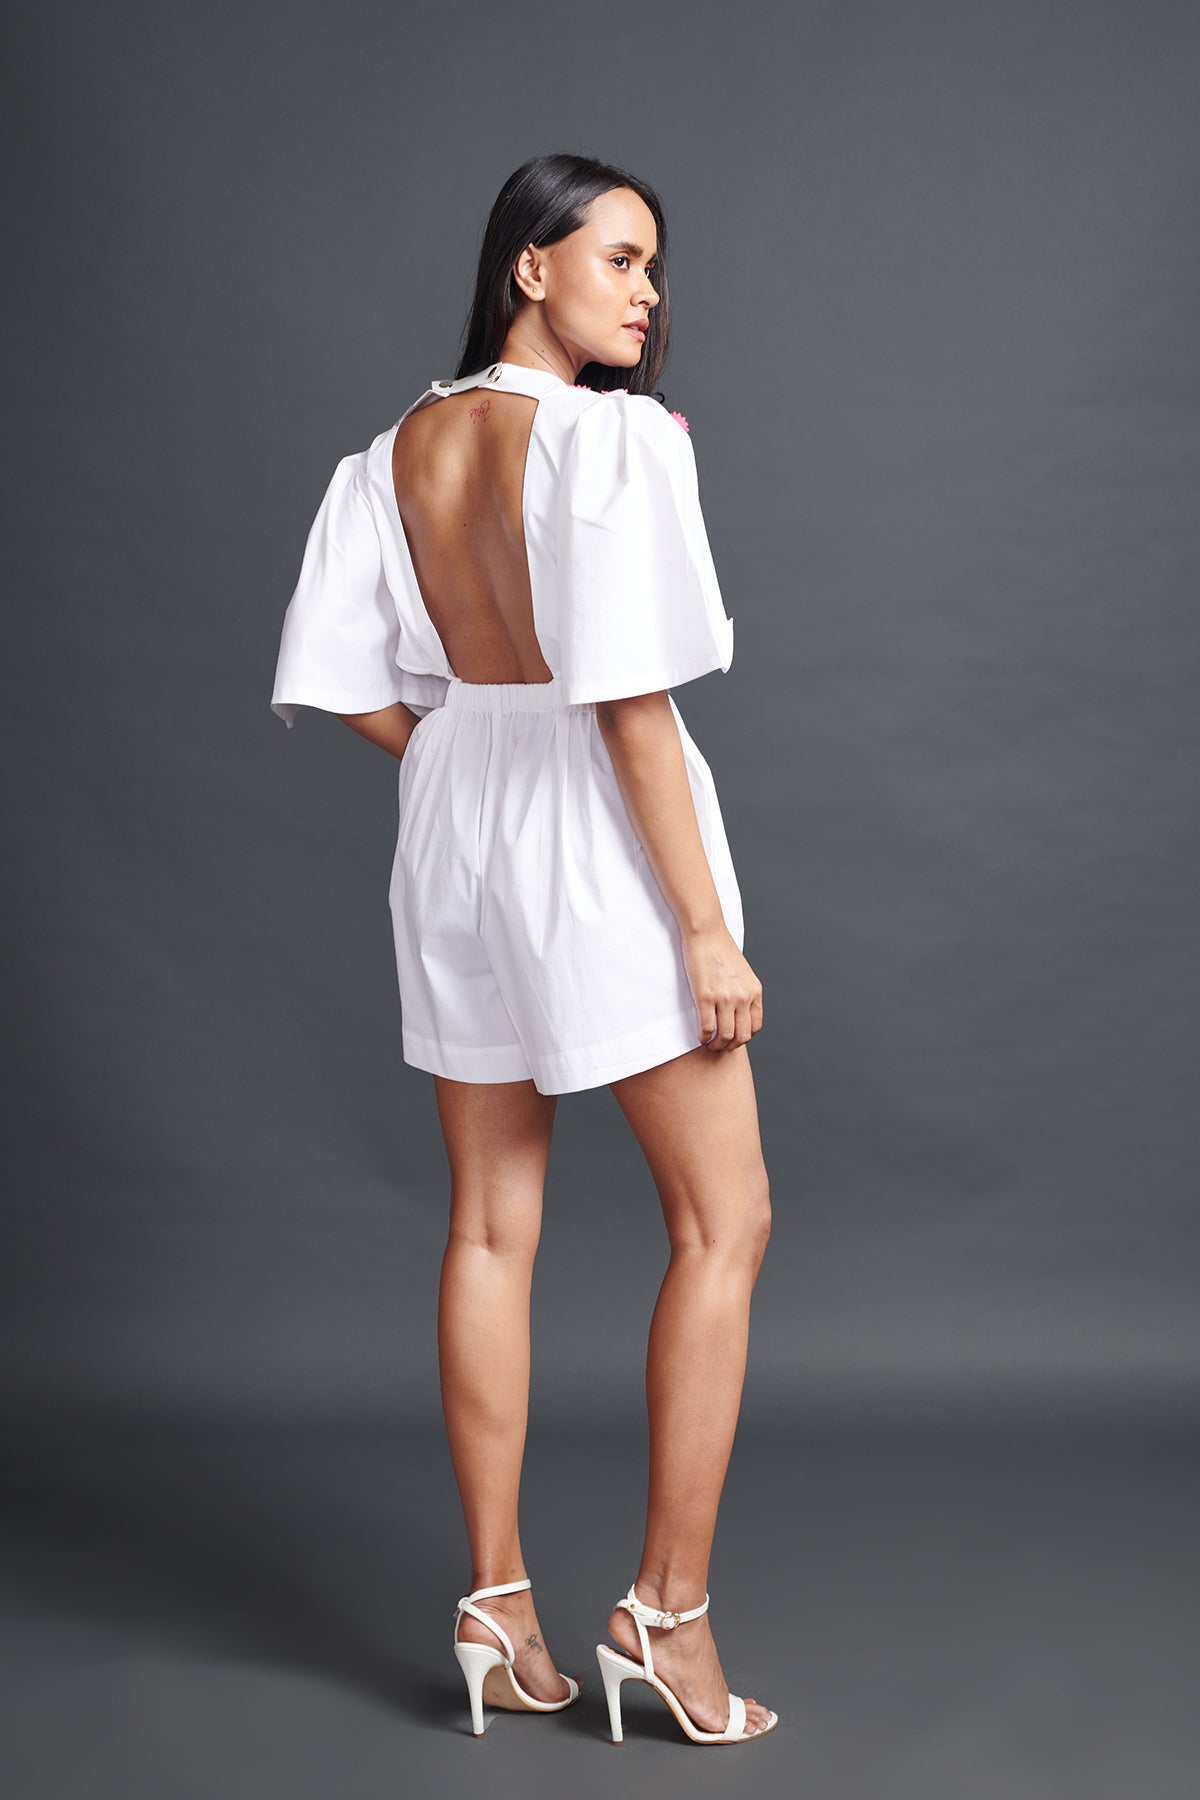 Image of WHITE PLAYSUIT IN COTTON BASE WITH CUTWORK EMBROIDERY AND BACKLESS SIDE CUT-OUT DETAIL. From savoirfashions.com